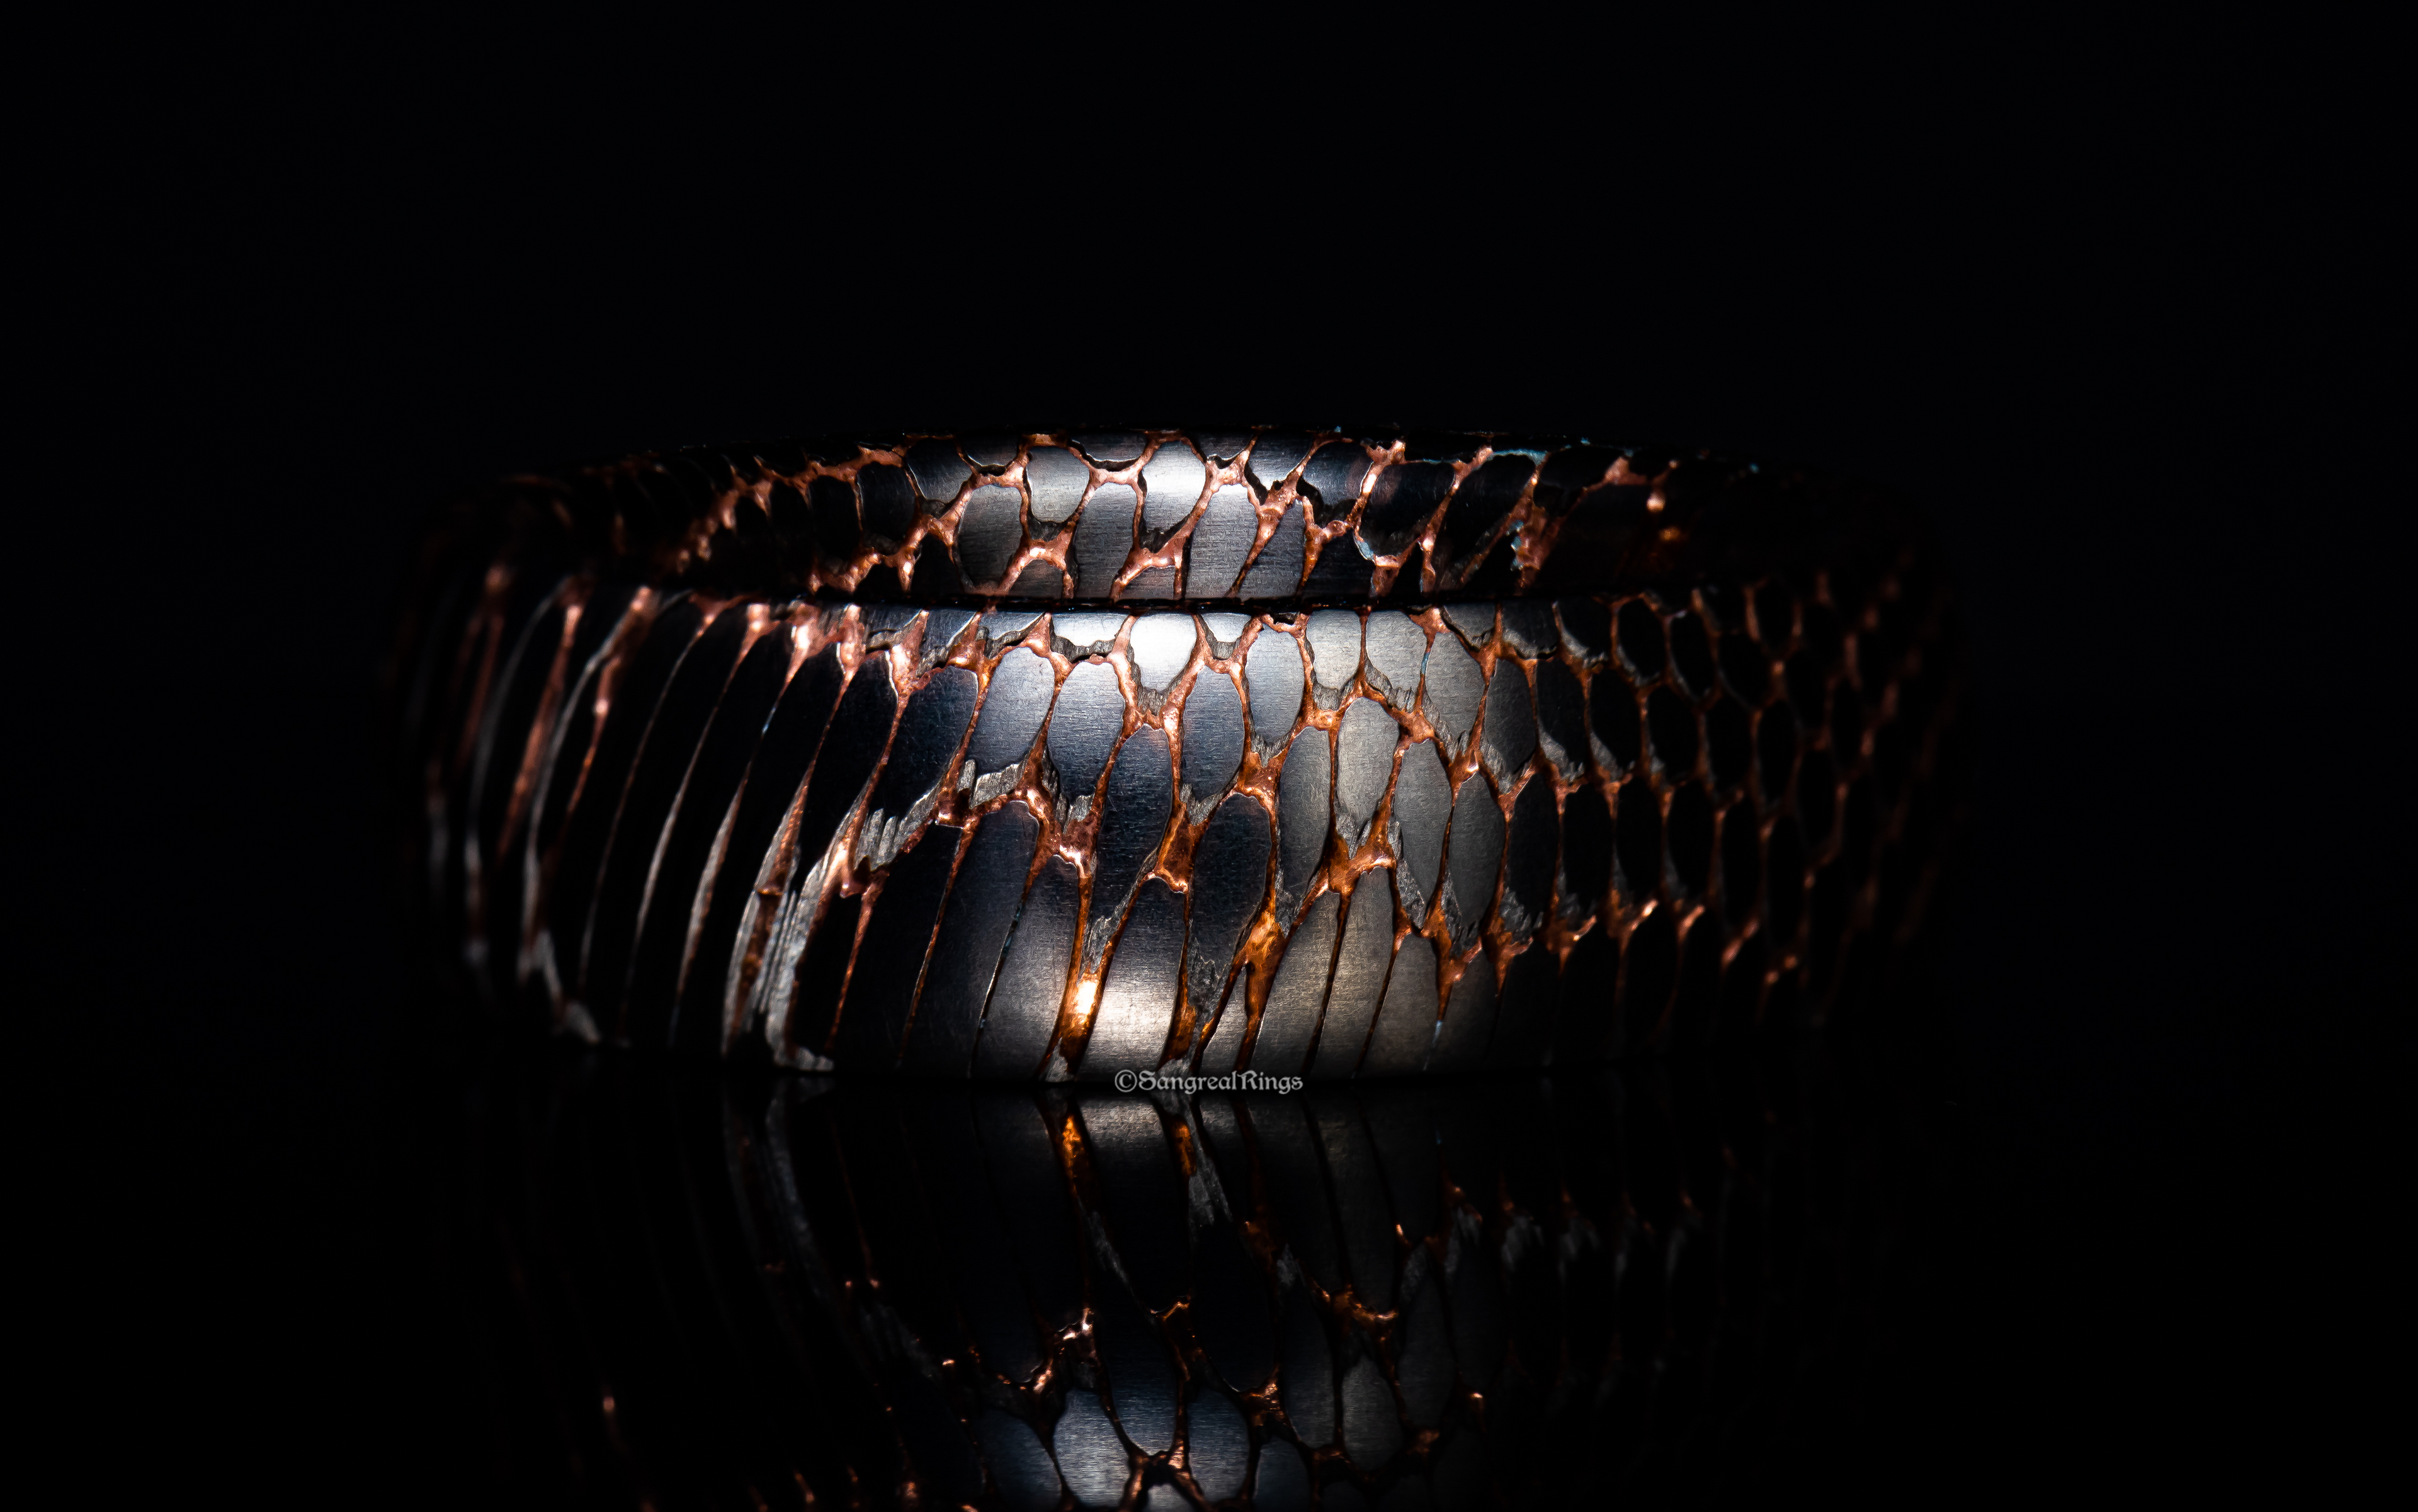 The Superconductor Ring